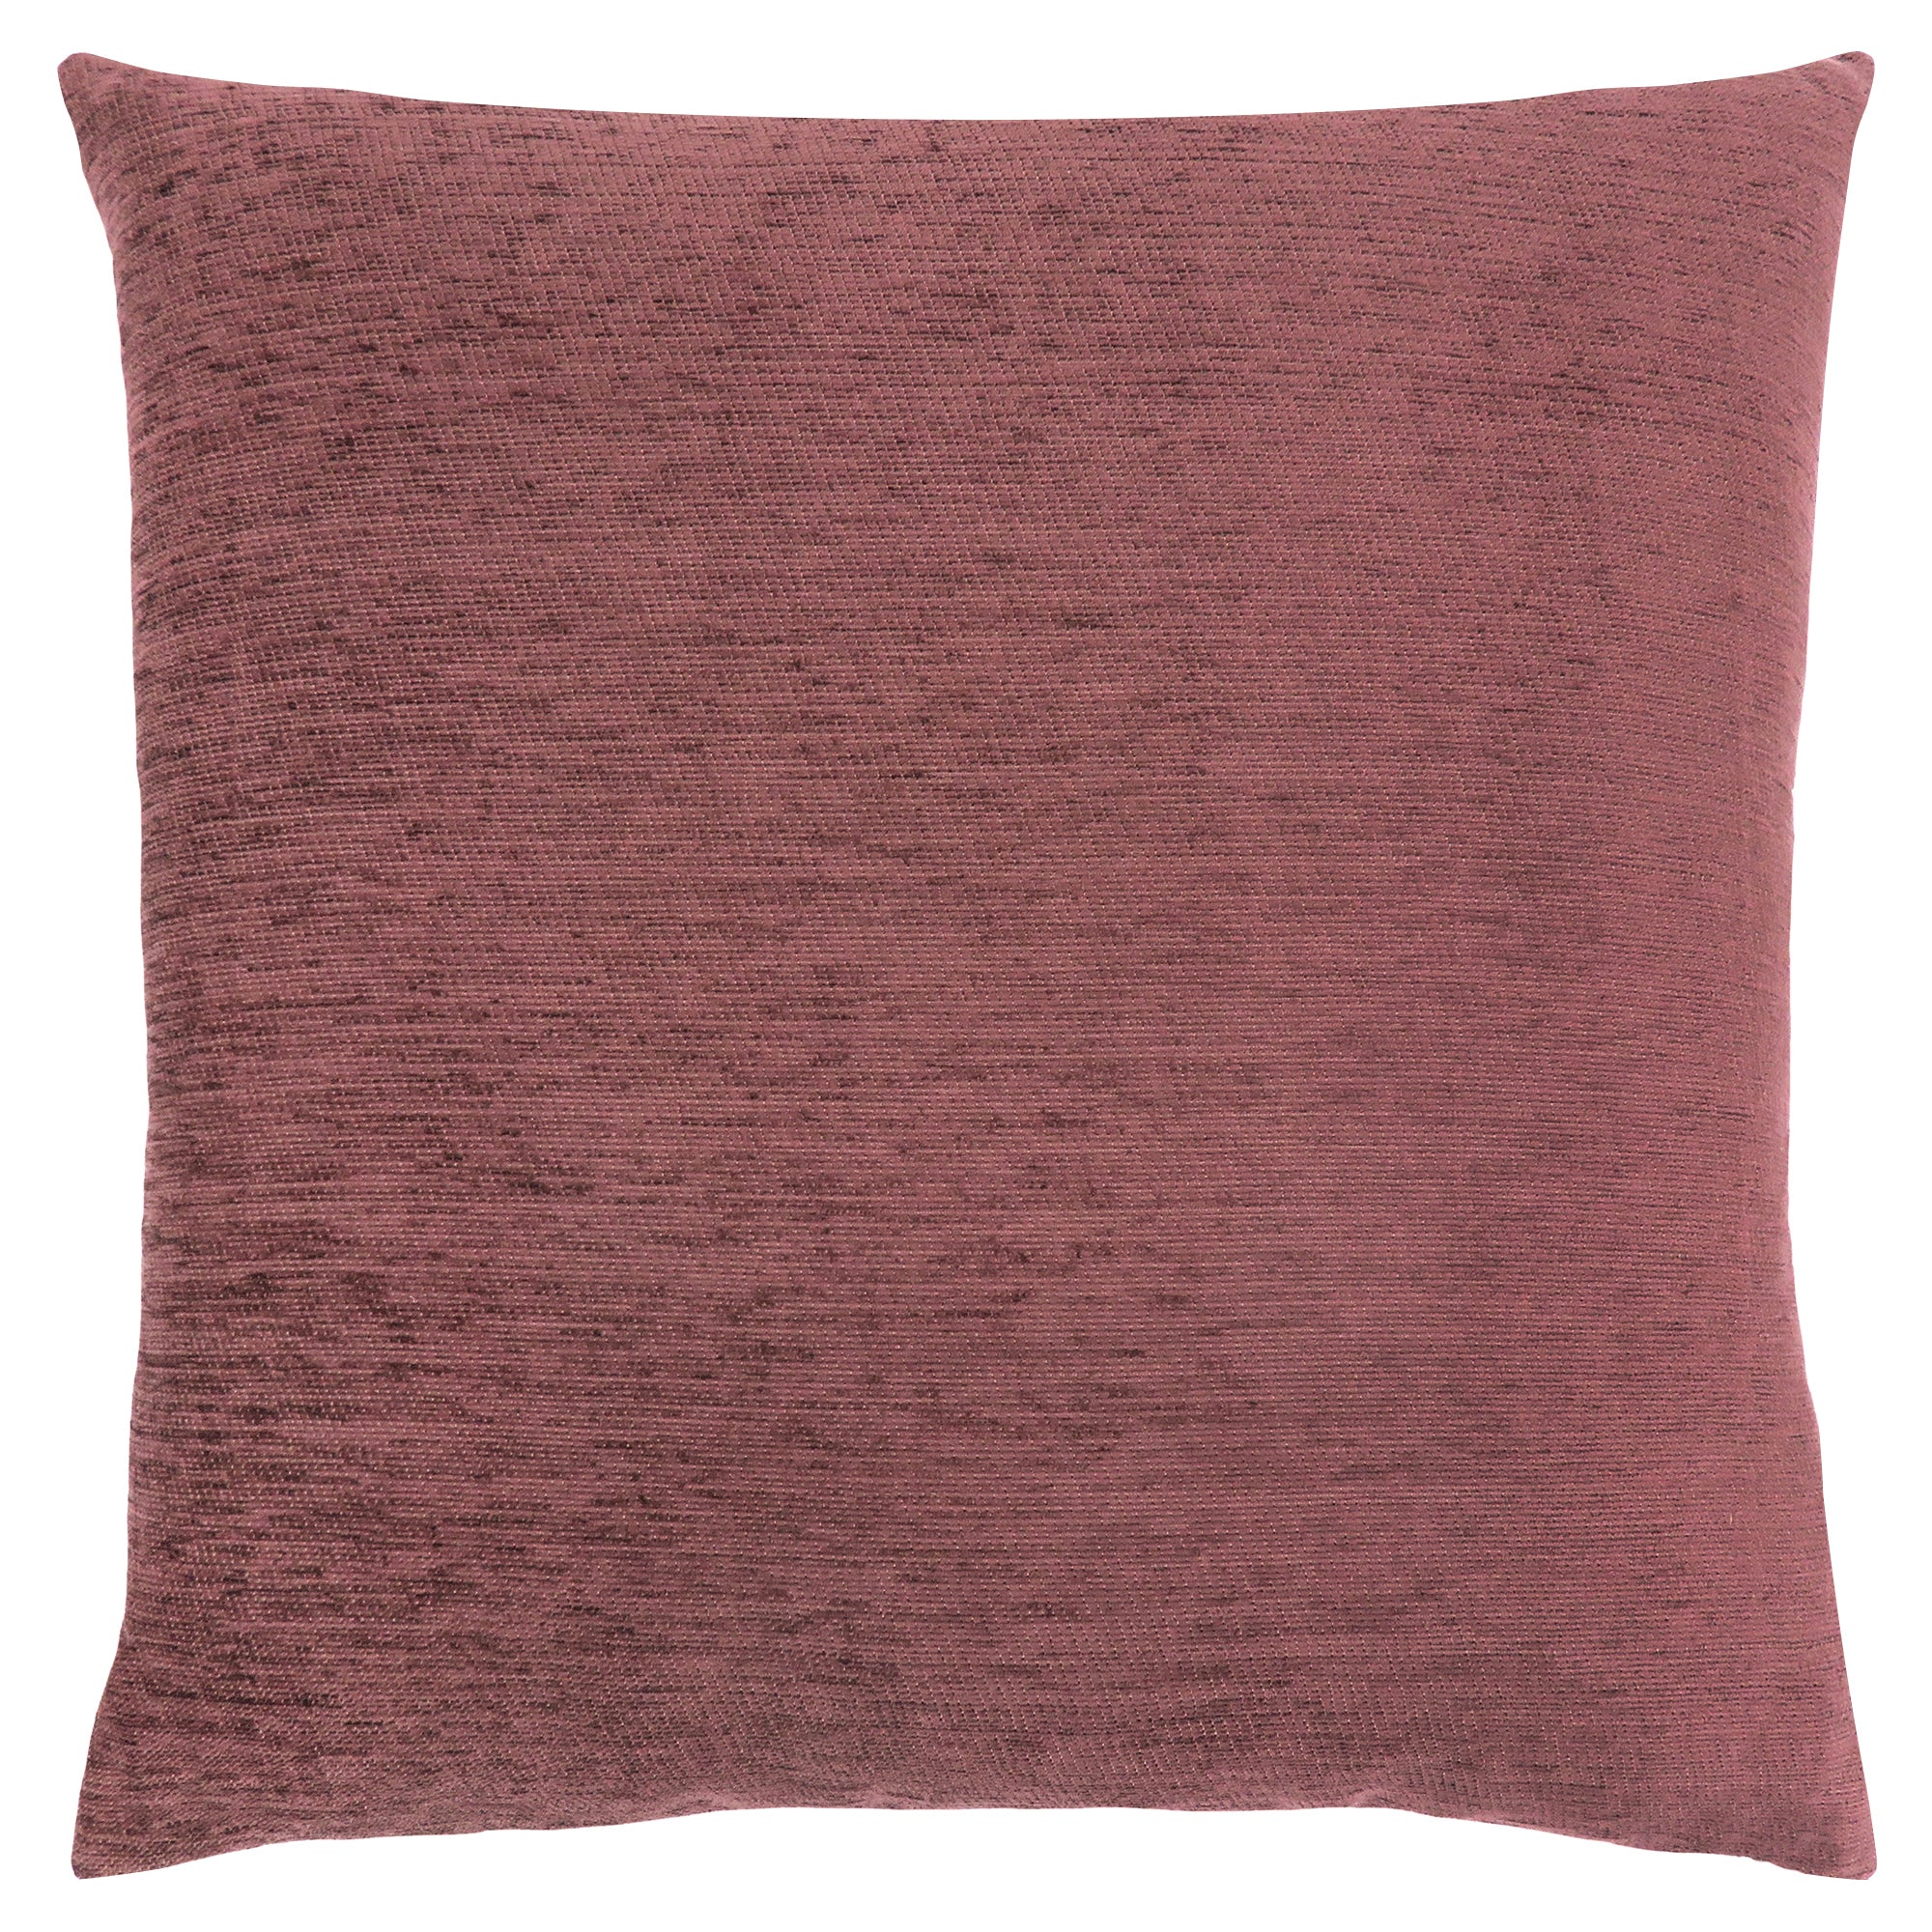 Pillow - 18X 18 / Solid Dusty Rose / 1Pc